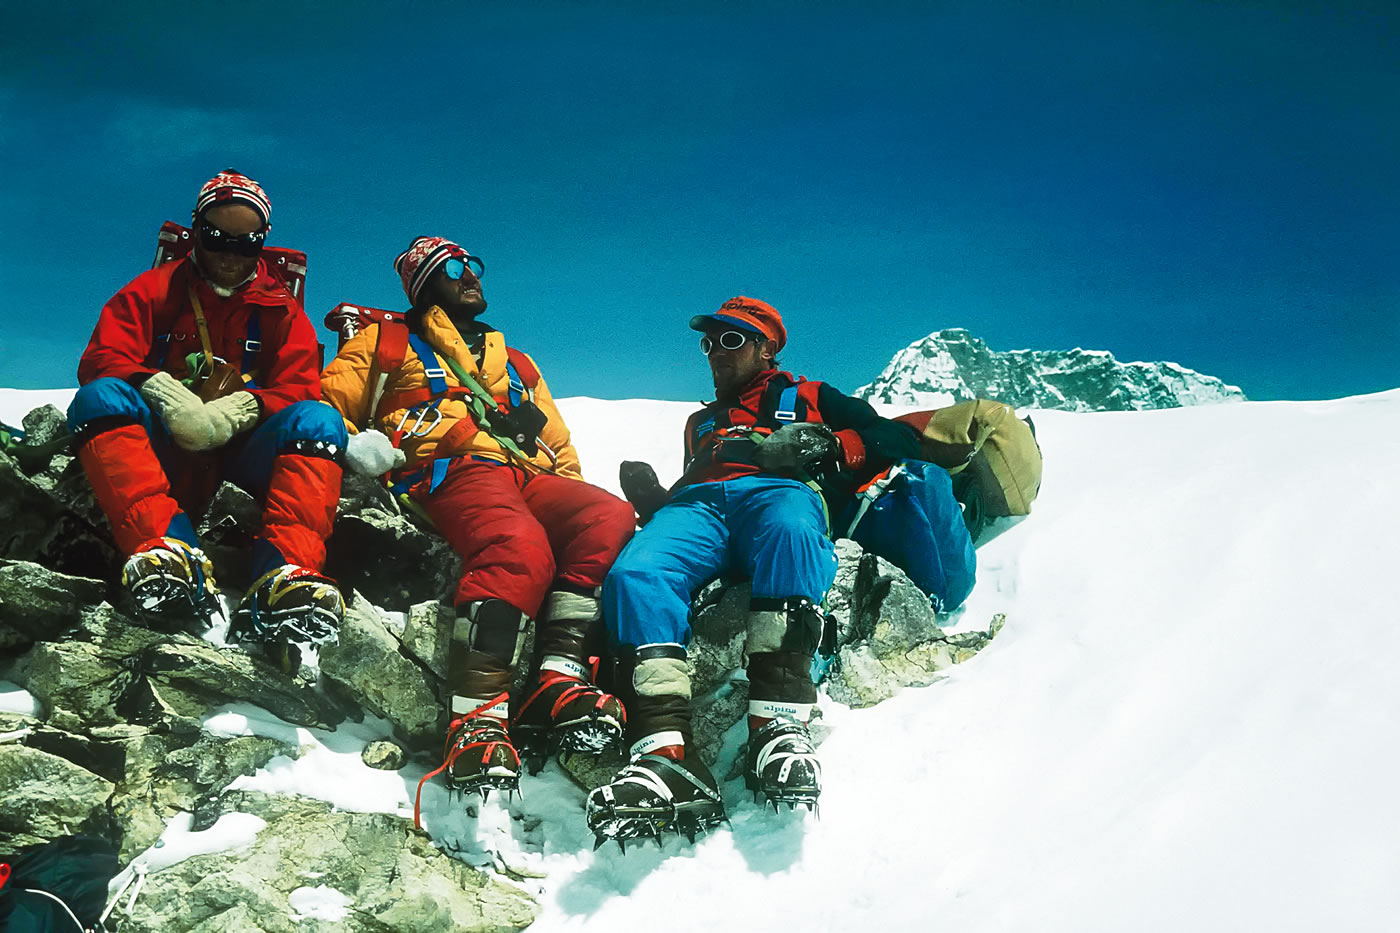 Marko Stremfelj, Marjan Manfreda and Knez during the Everest West Ridge Direct expedition. In Alpinist 27, Andrej Stremfelj wrote: Today what we did seems like madness. [Photo] Andrej Stremfelj collection